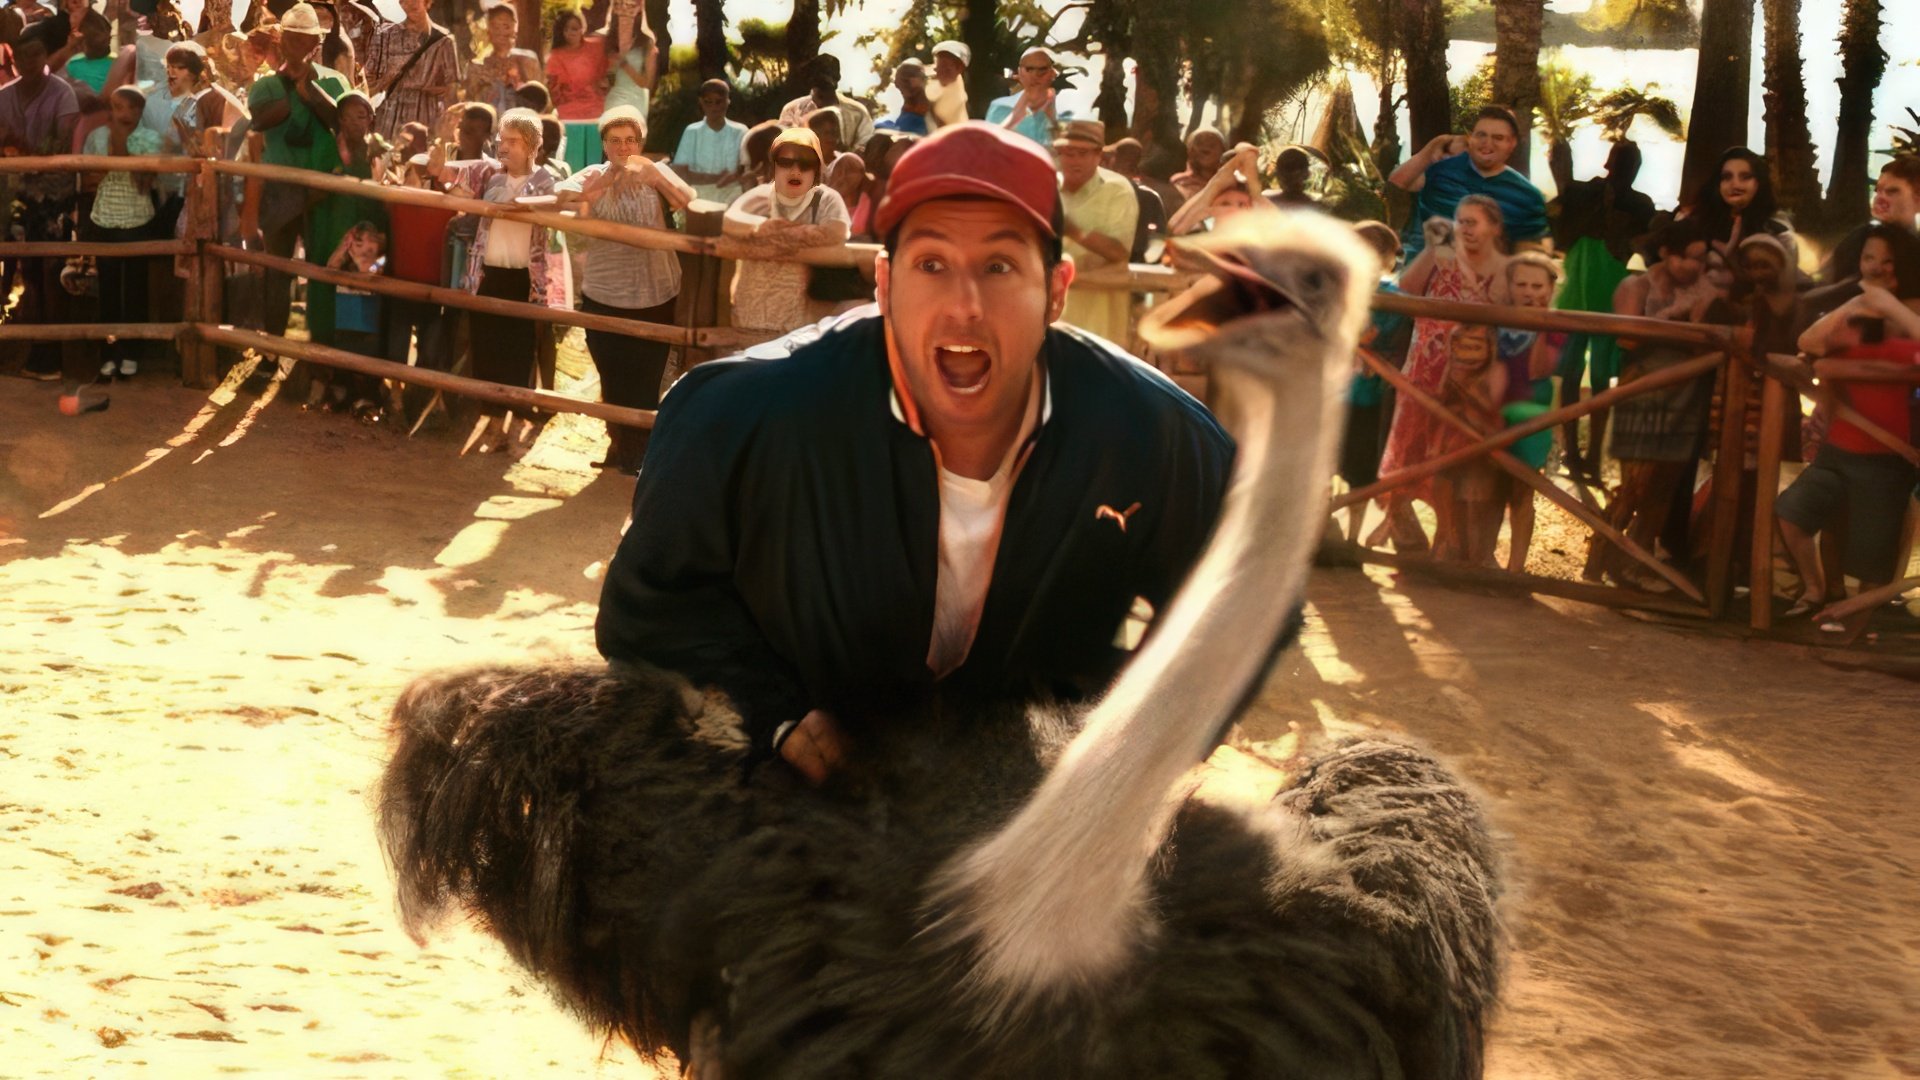 A scene from the «Blended»